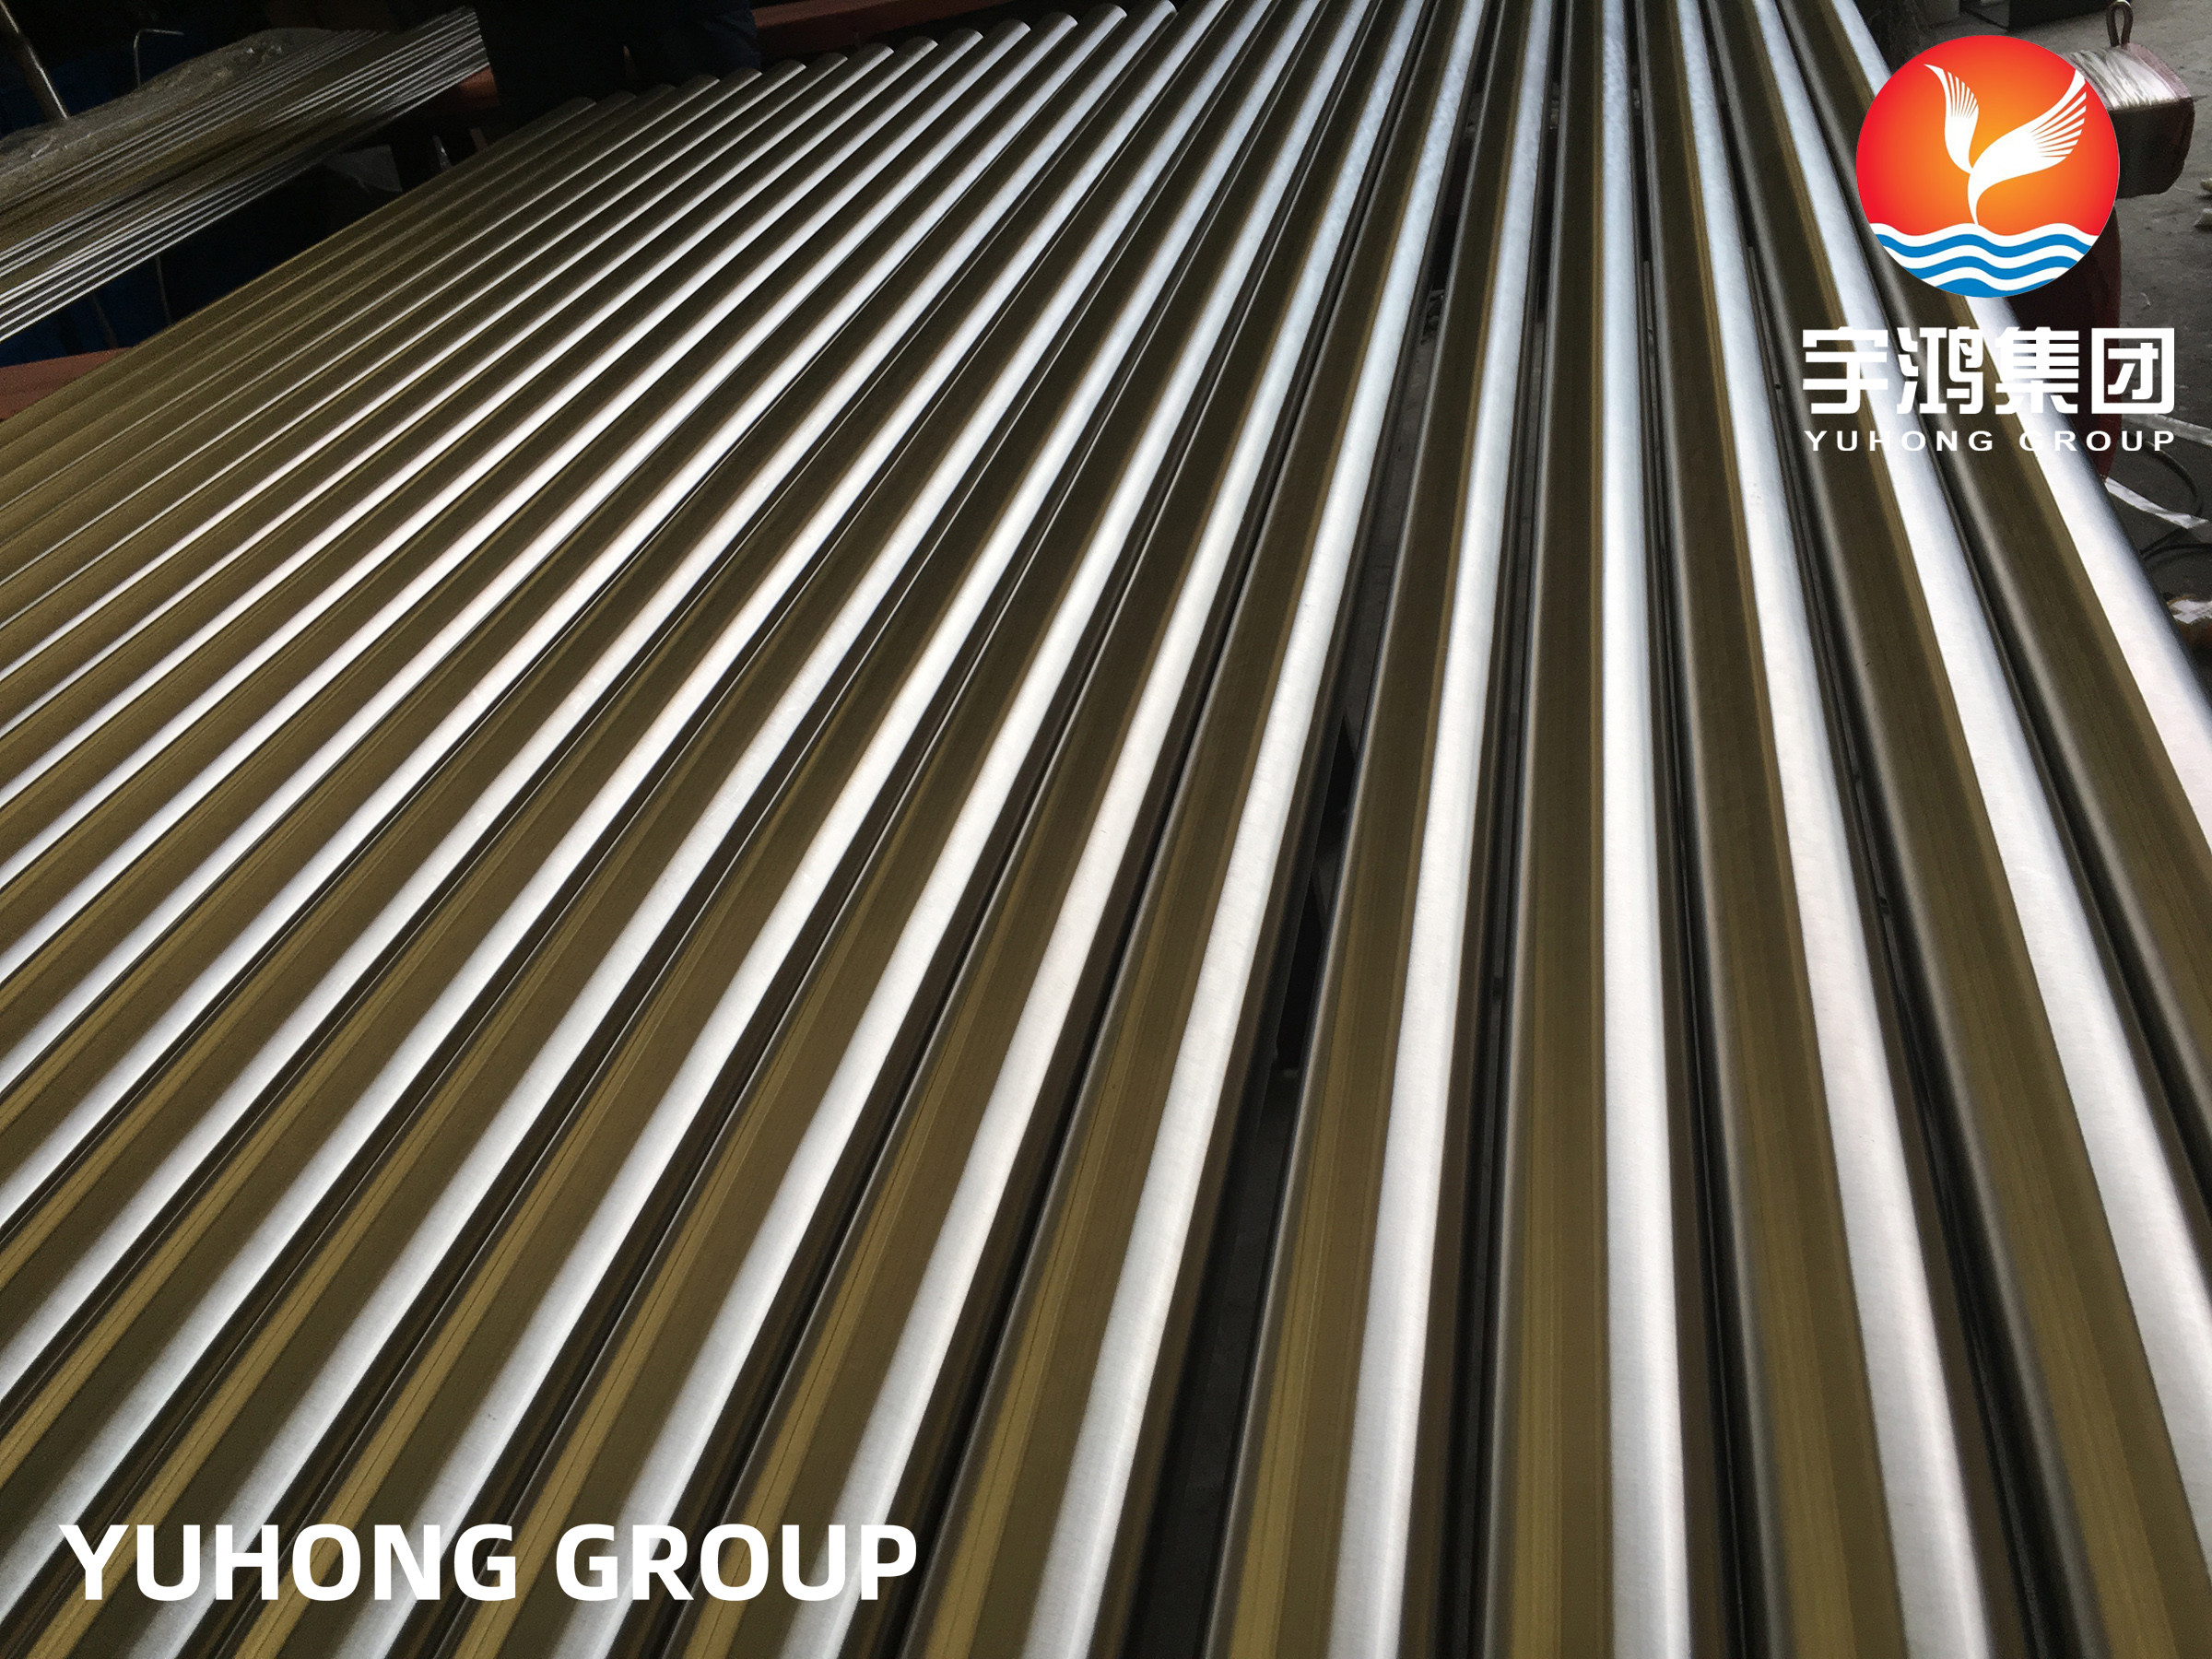 China ASTM A213 / ASME SA213 TP304 BRIGHT ANNEALED STAINLESS STEEL TUBE FOR HEAT EXCHANGER wholesale